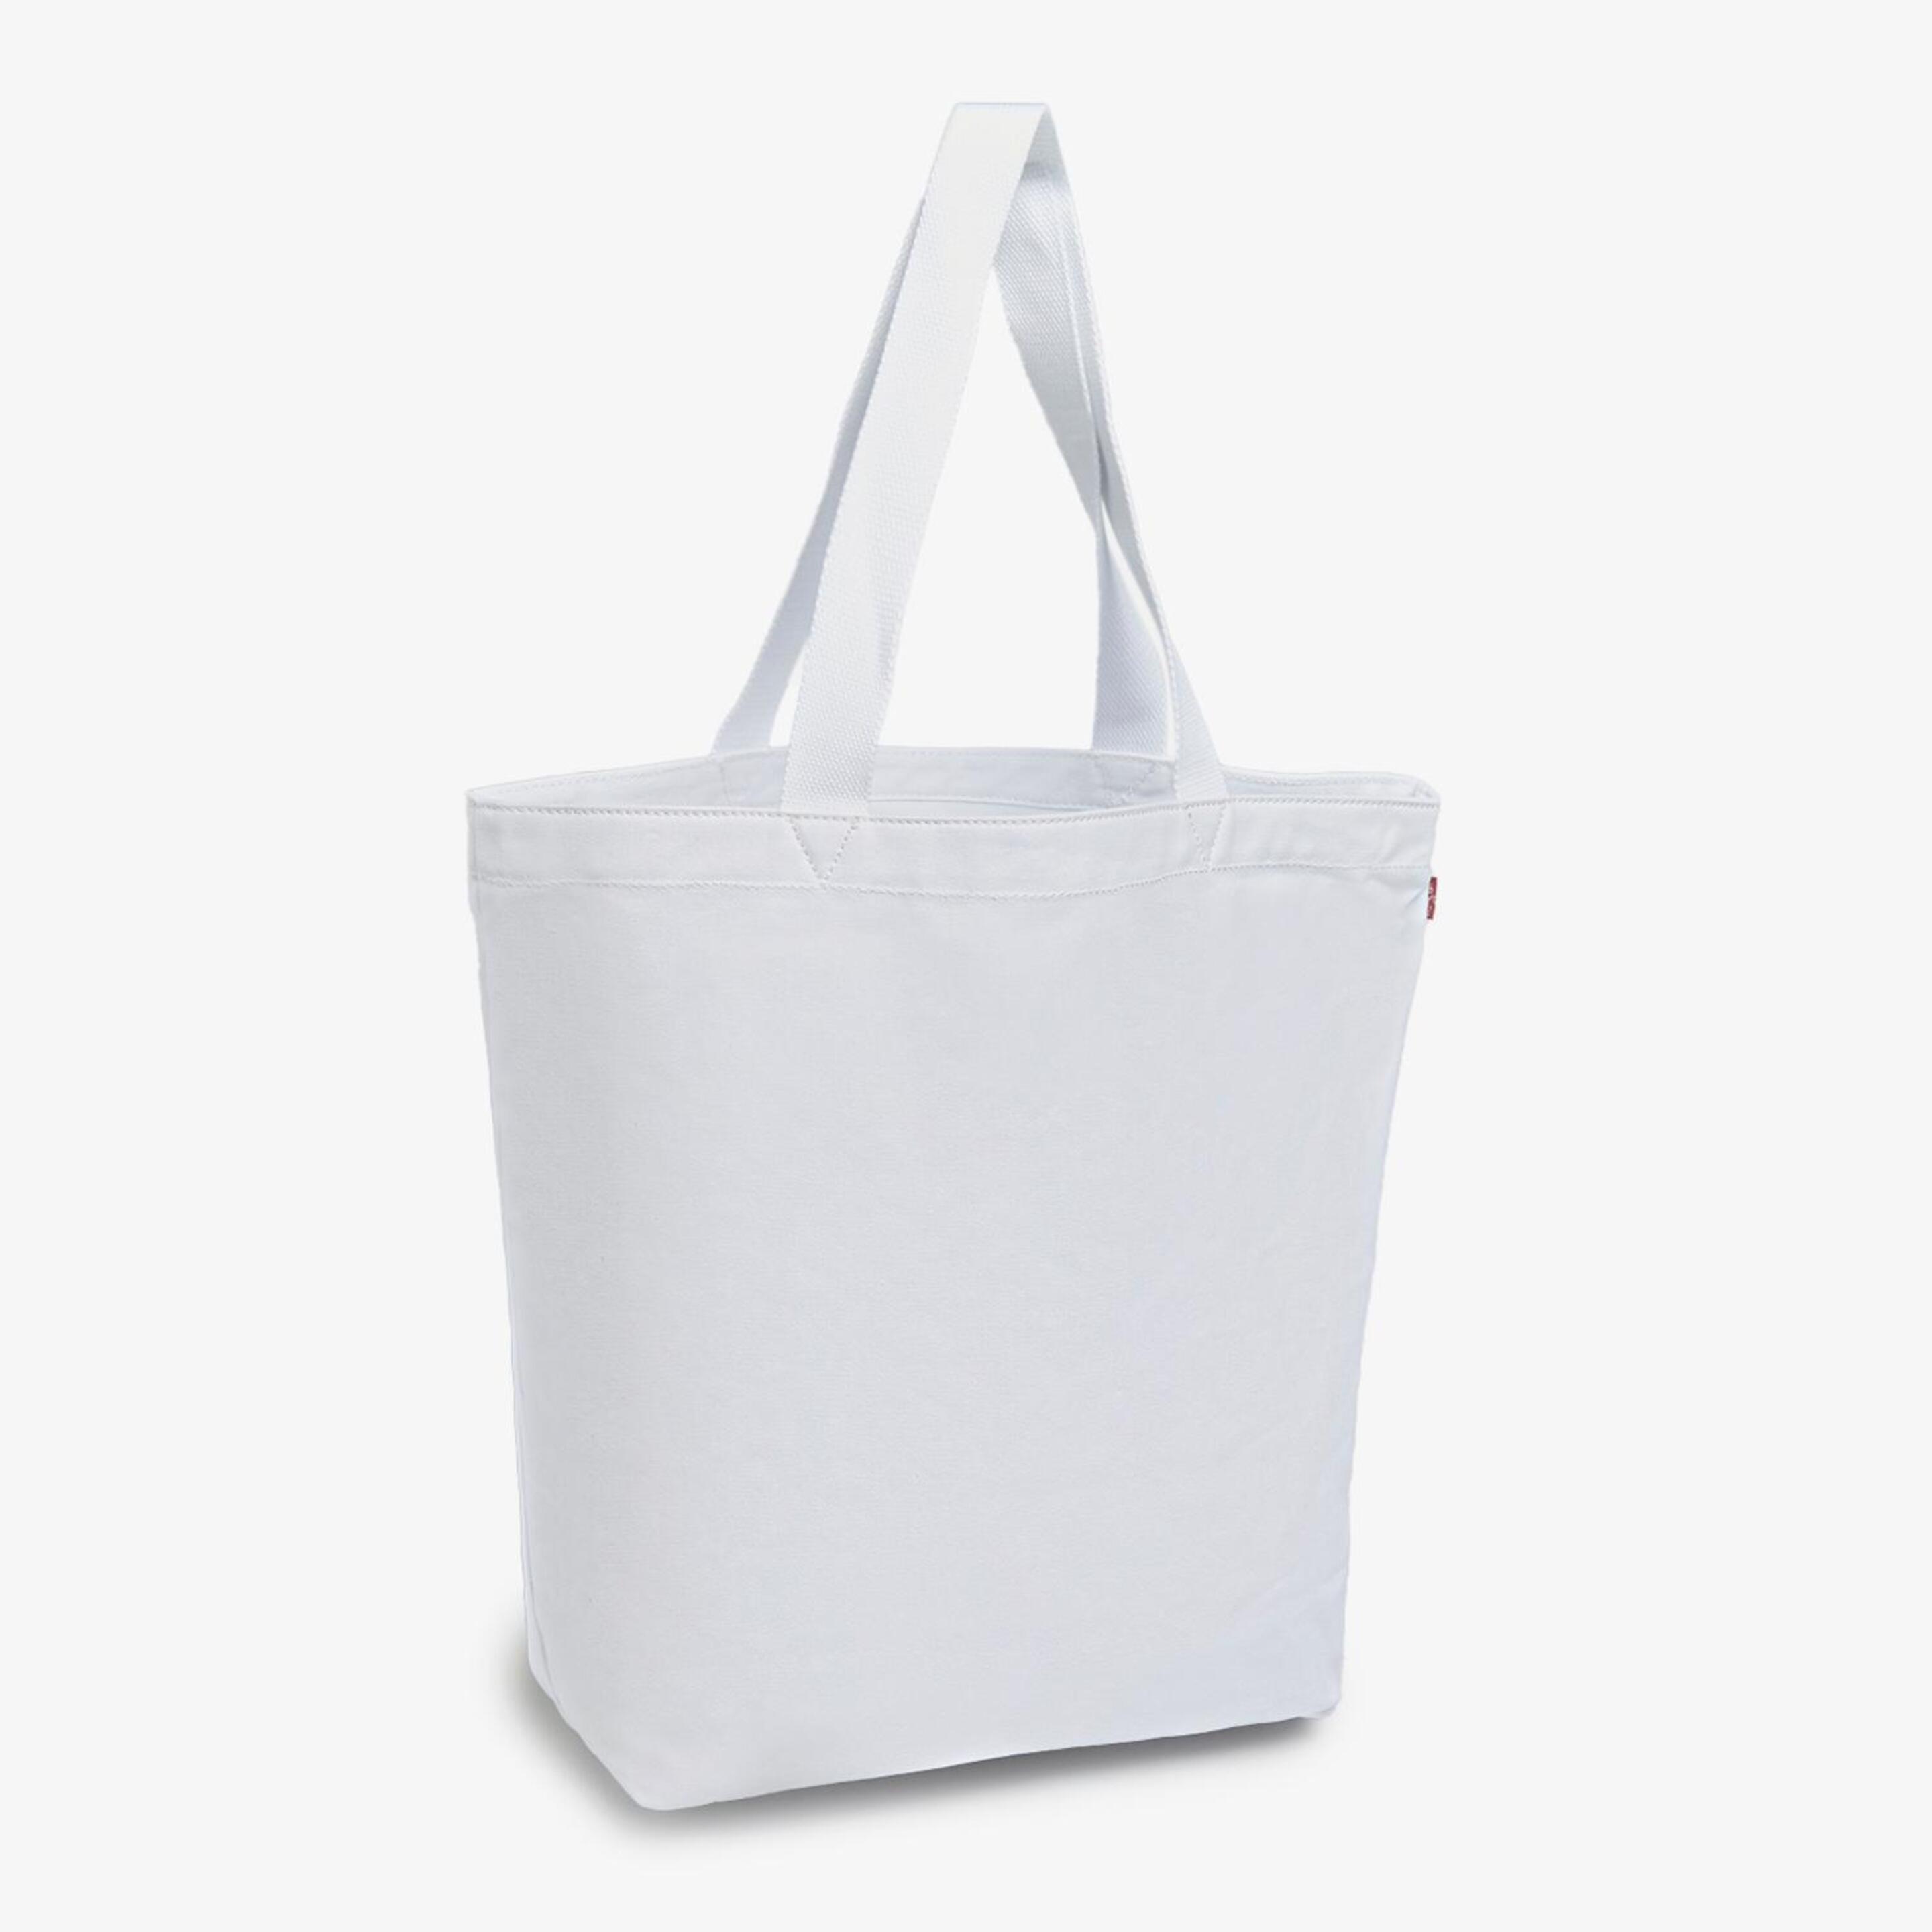 Batwing Tote Sra Blso